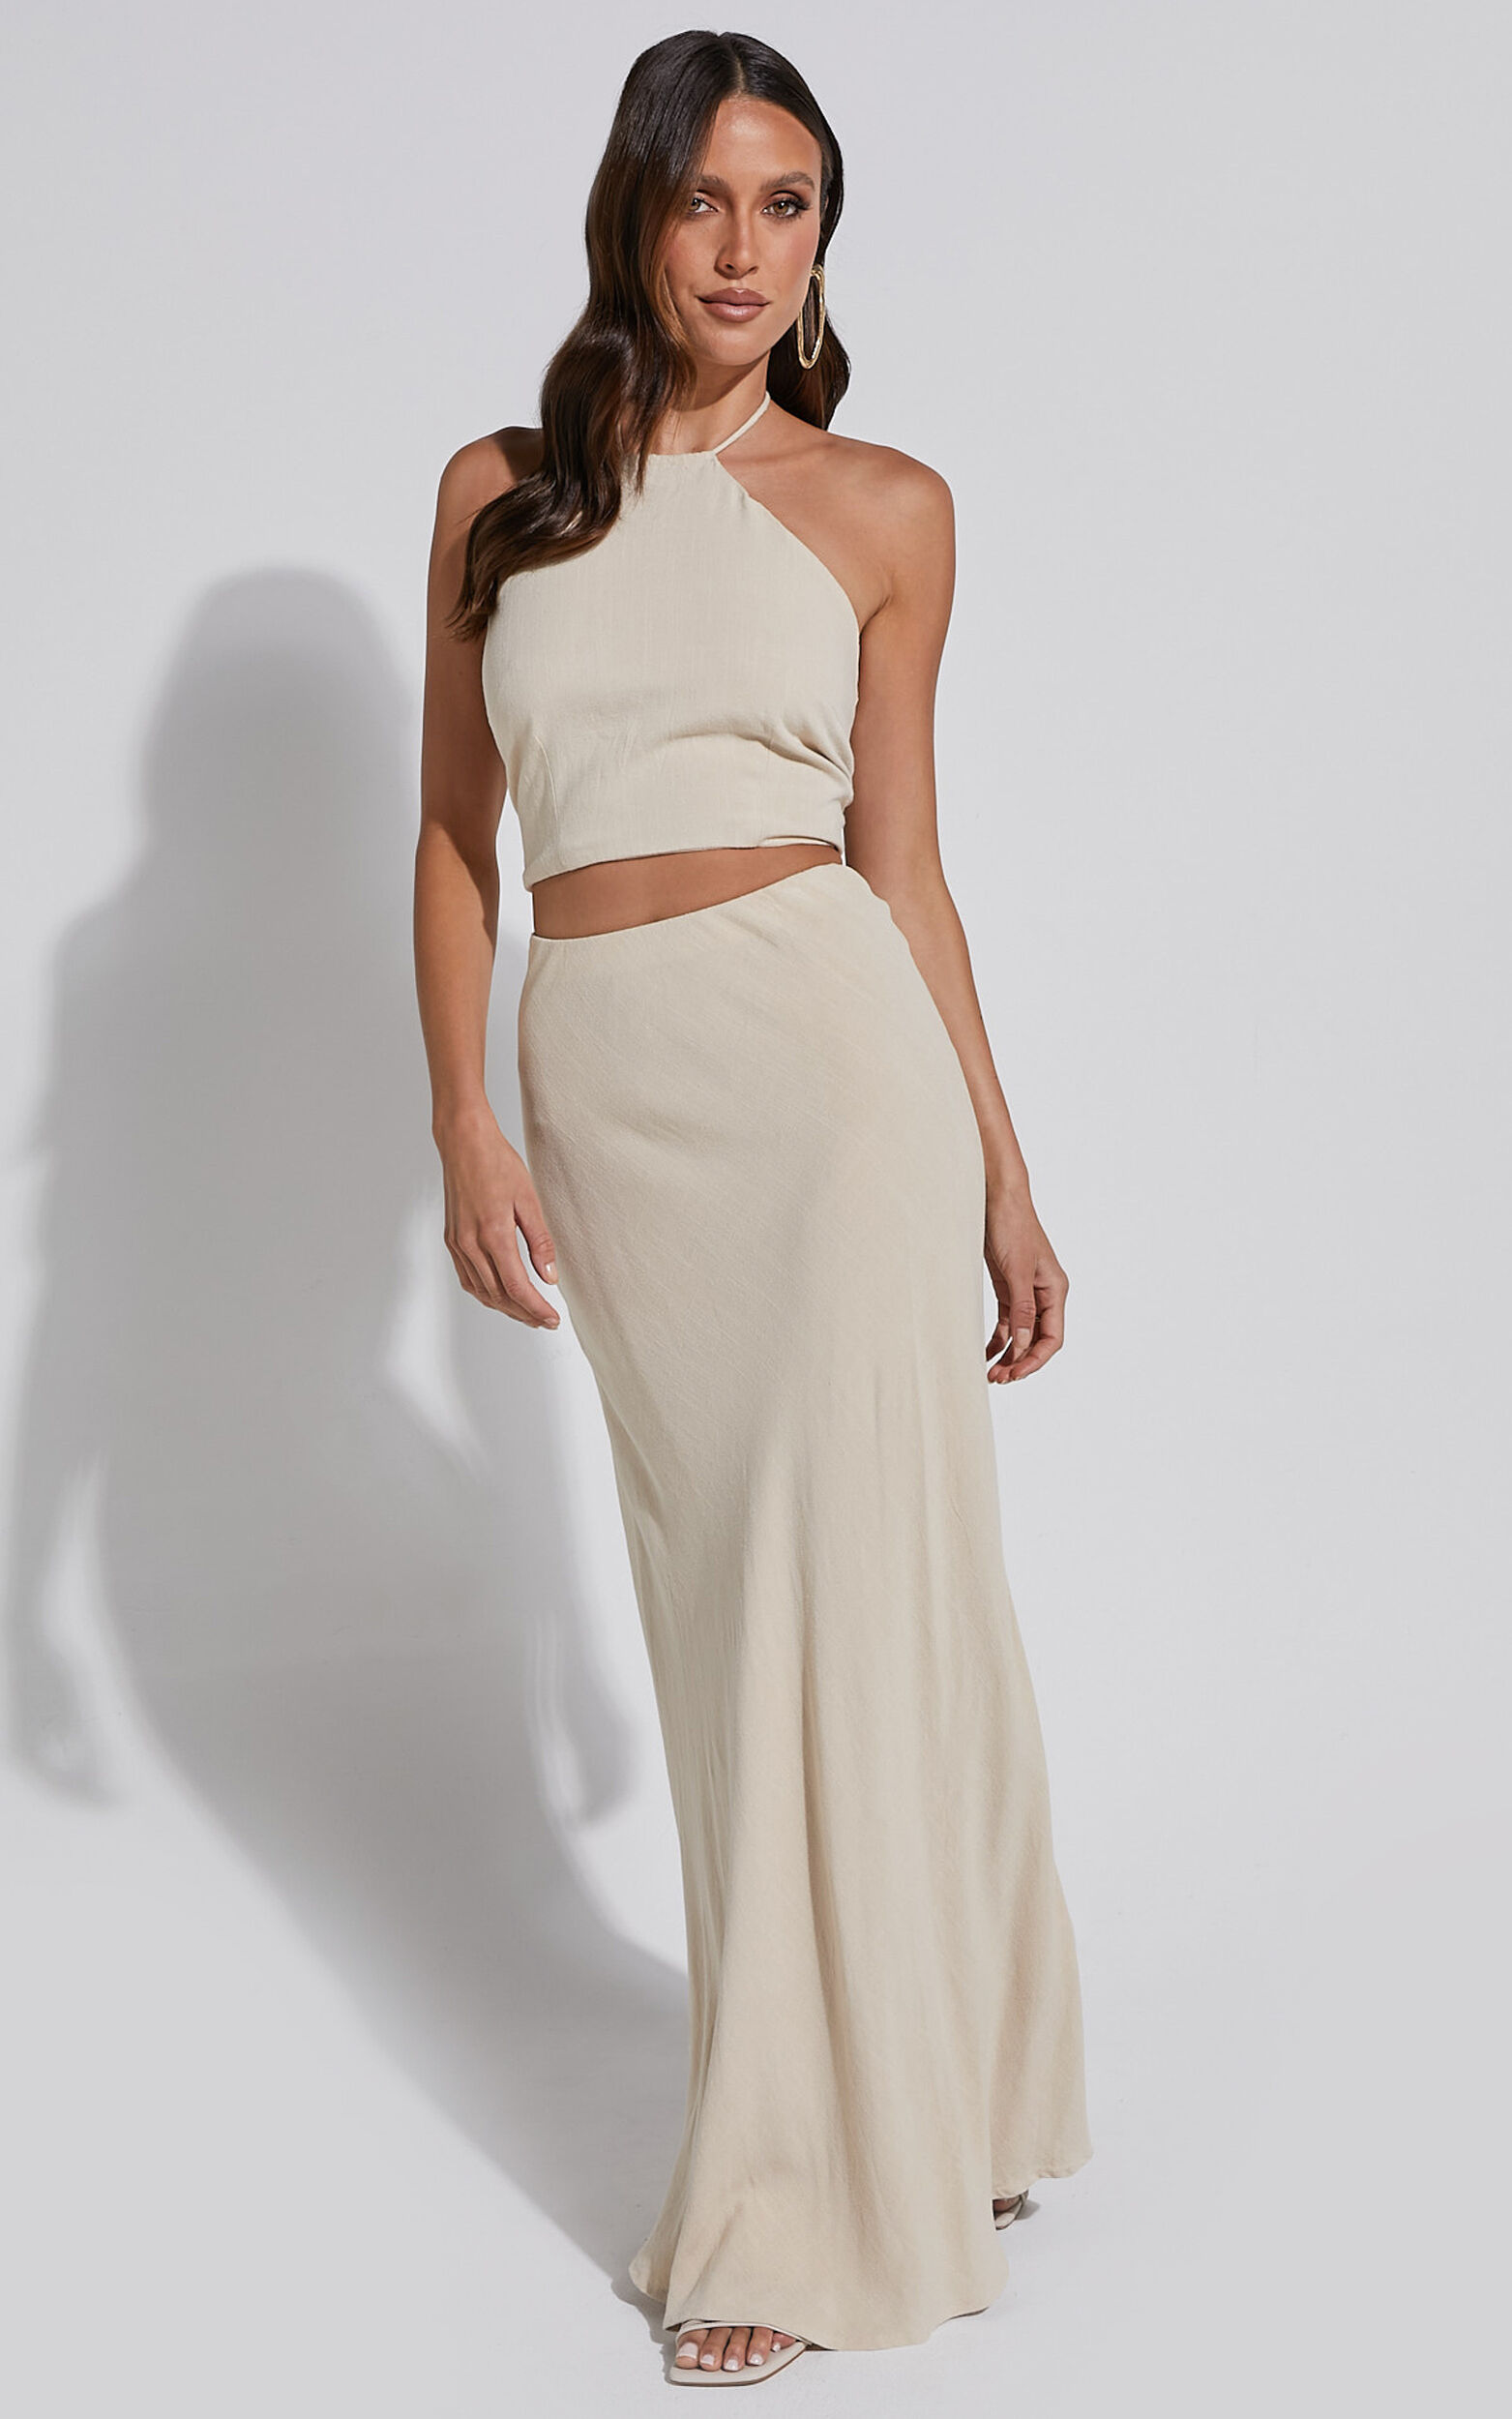 Chelsea Two Piece Set - Linen Look Halter Neck Top and Bias Cut Sheer Maxi Skirt in Natural - 06, NEU1